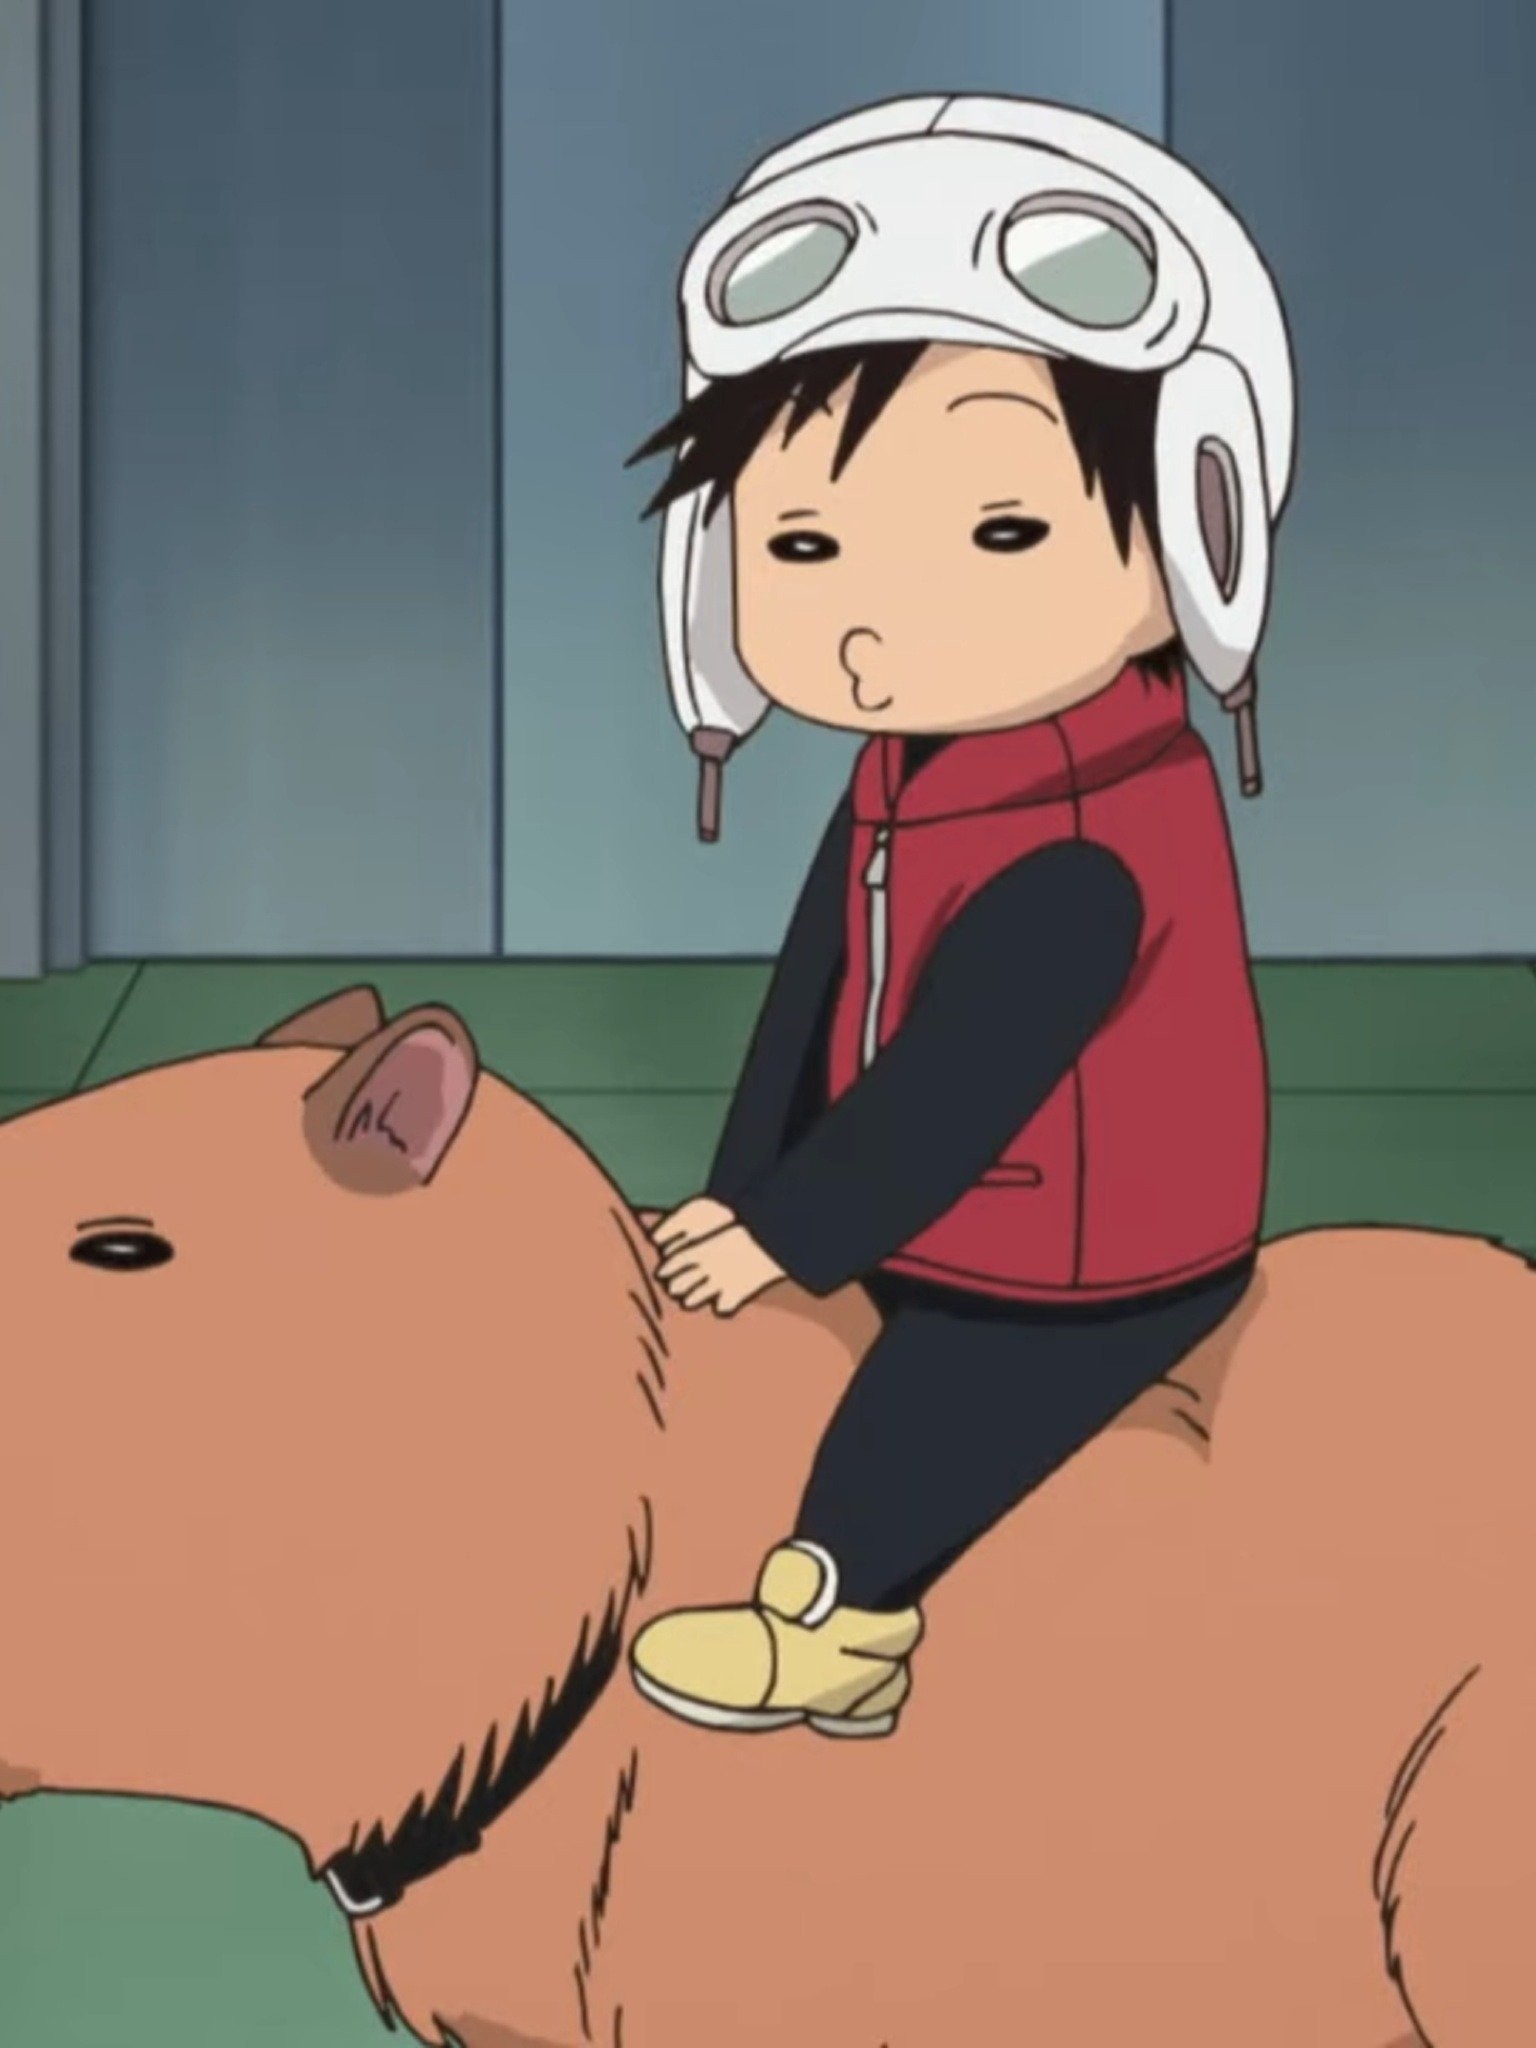 World Trigger - Rotten Tomatoes